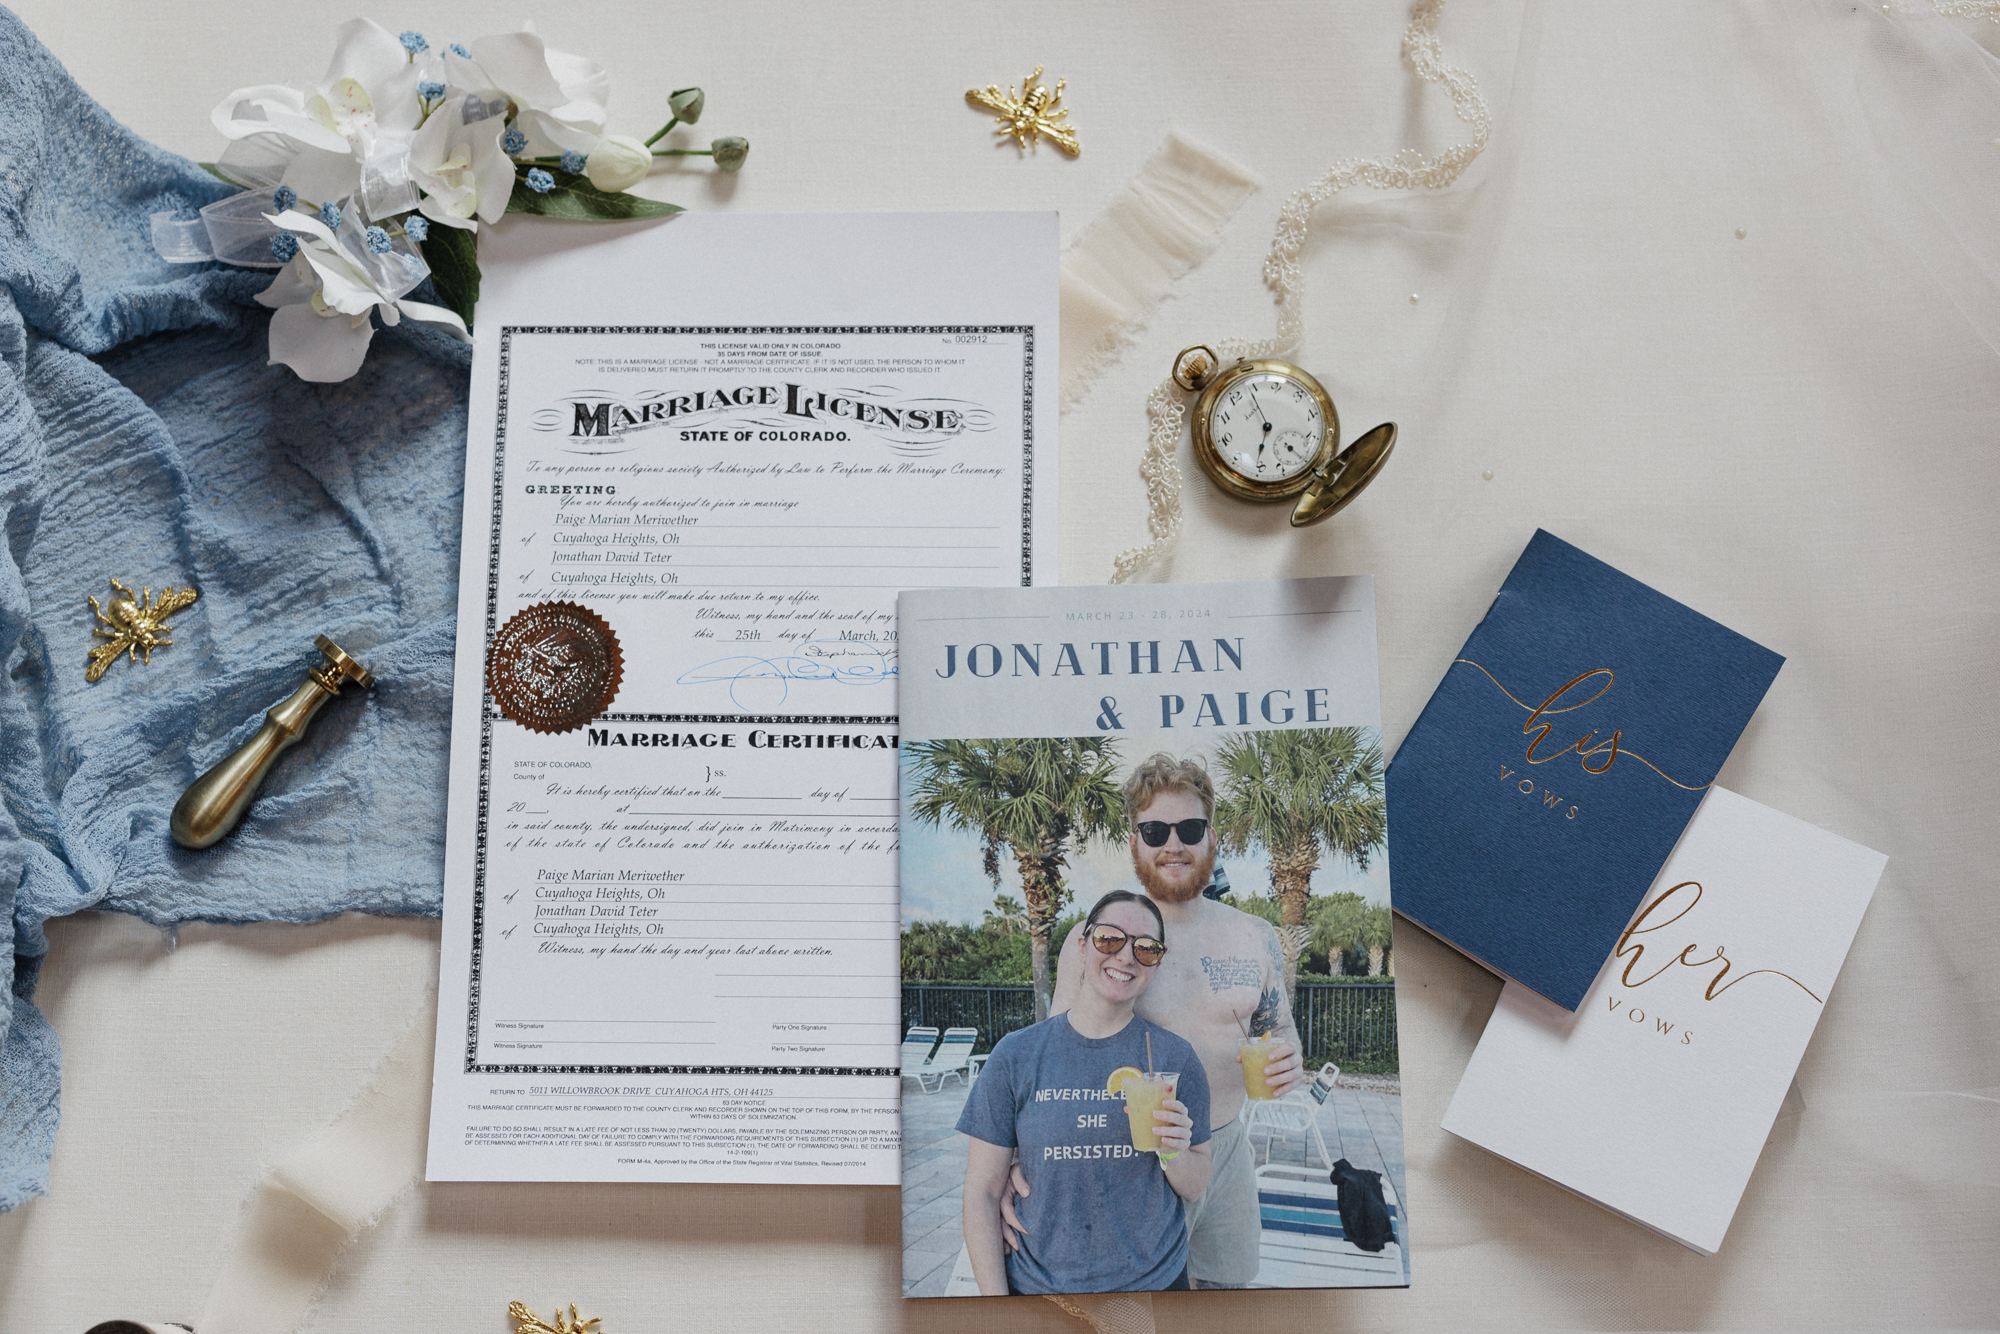 Flatlay photo of micro wedding details and Colorado marriage license.